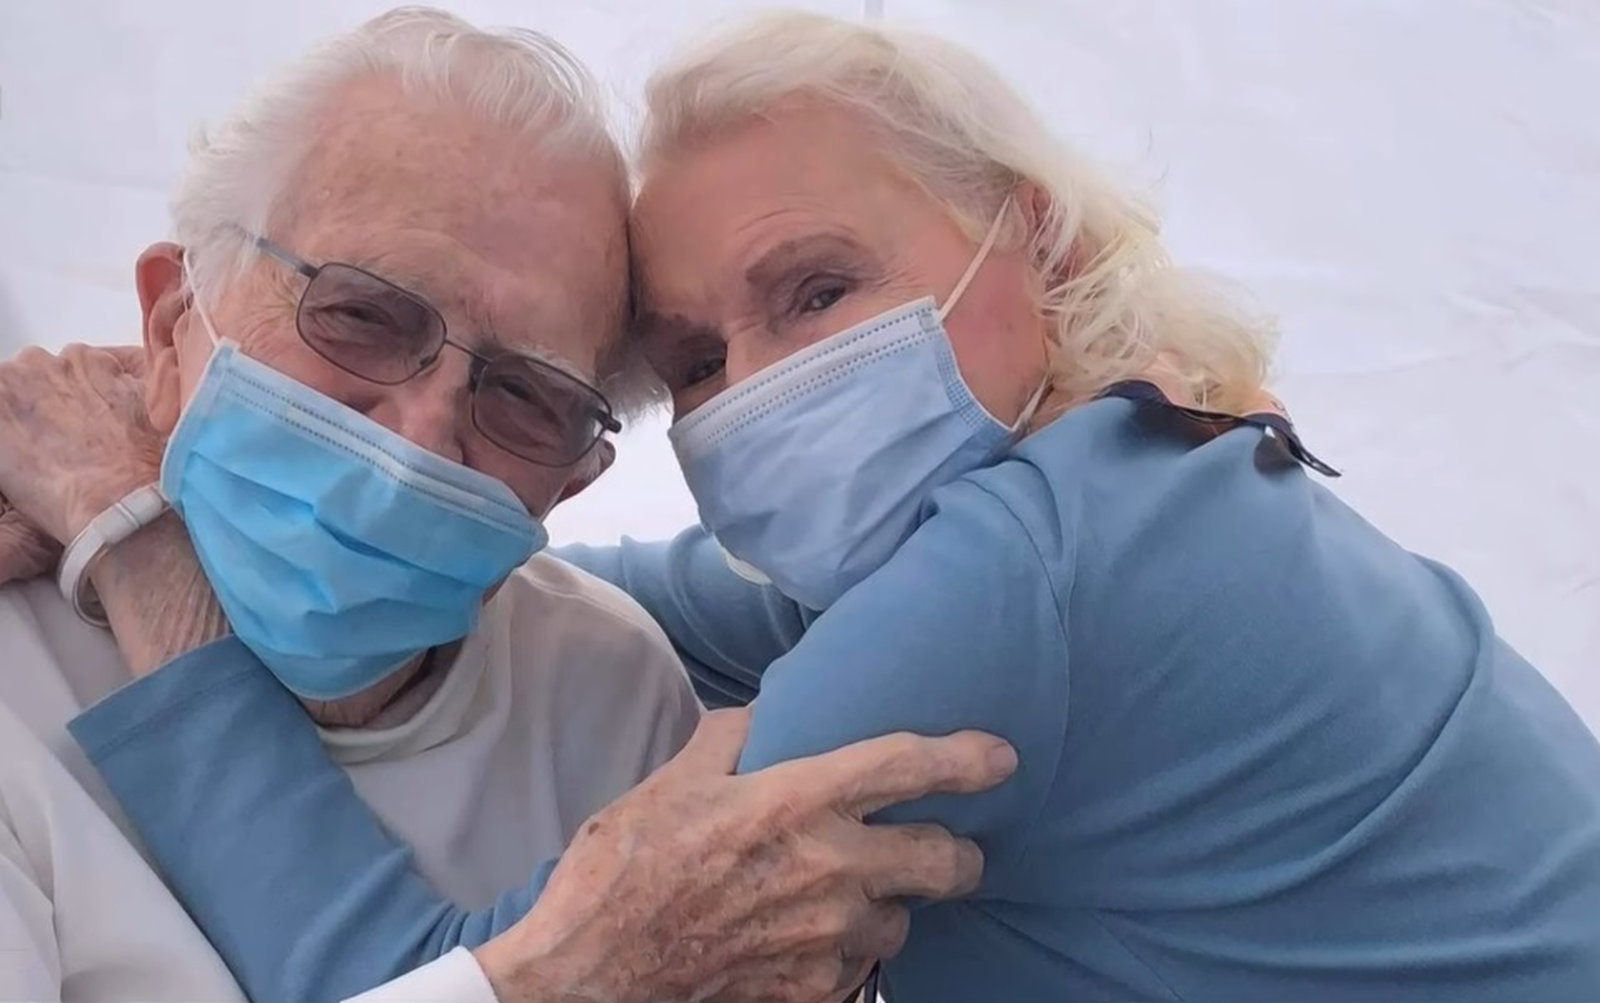 kenneth and elizabeth gage posing with their arms wrapped around each other as they each wear face masks.